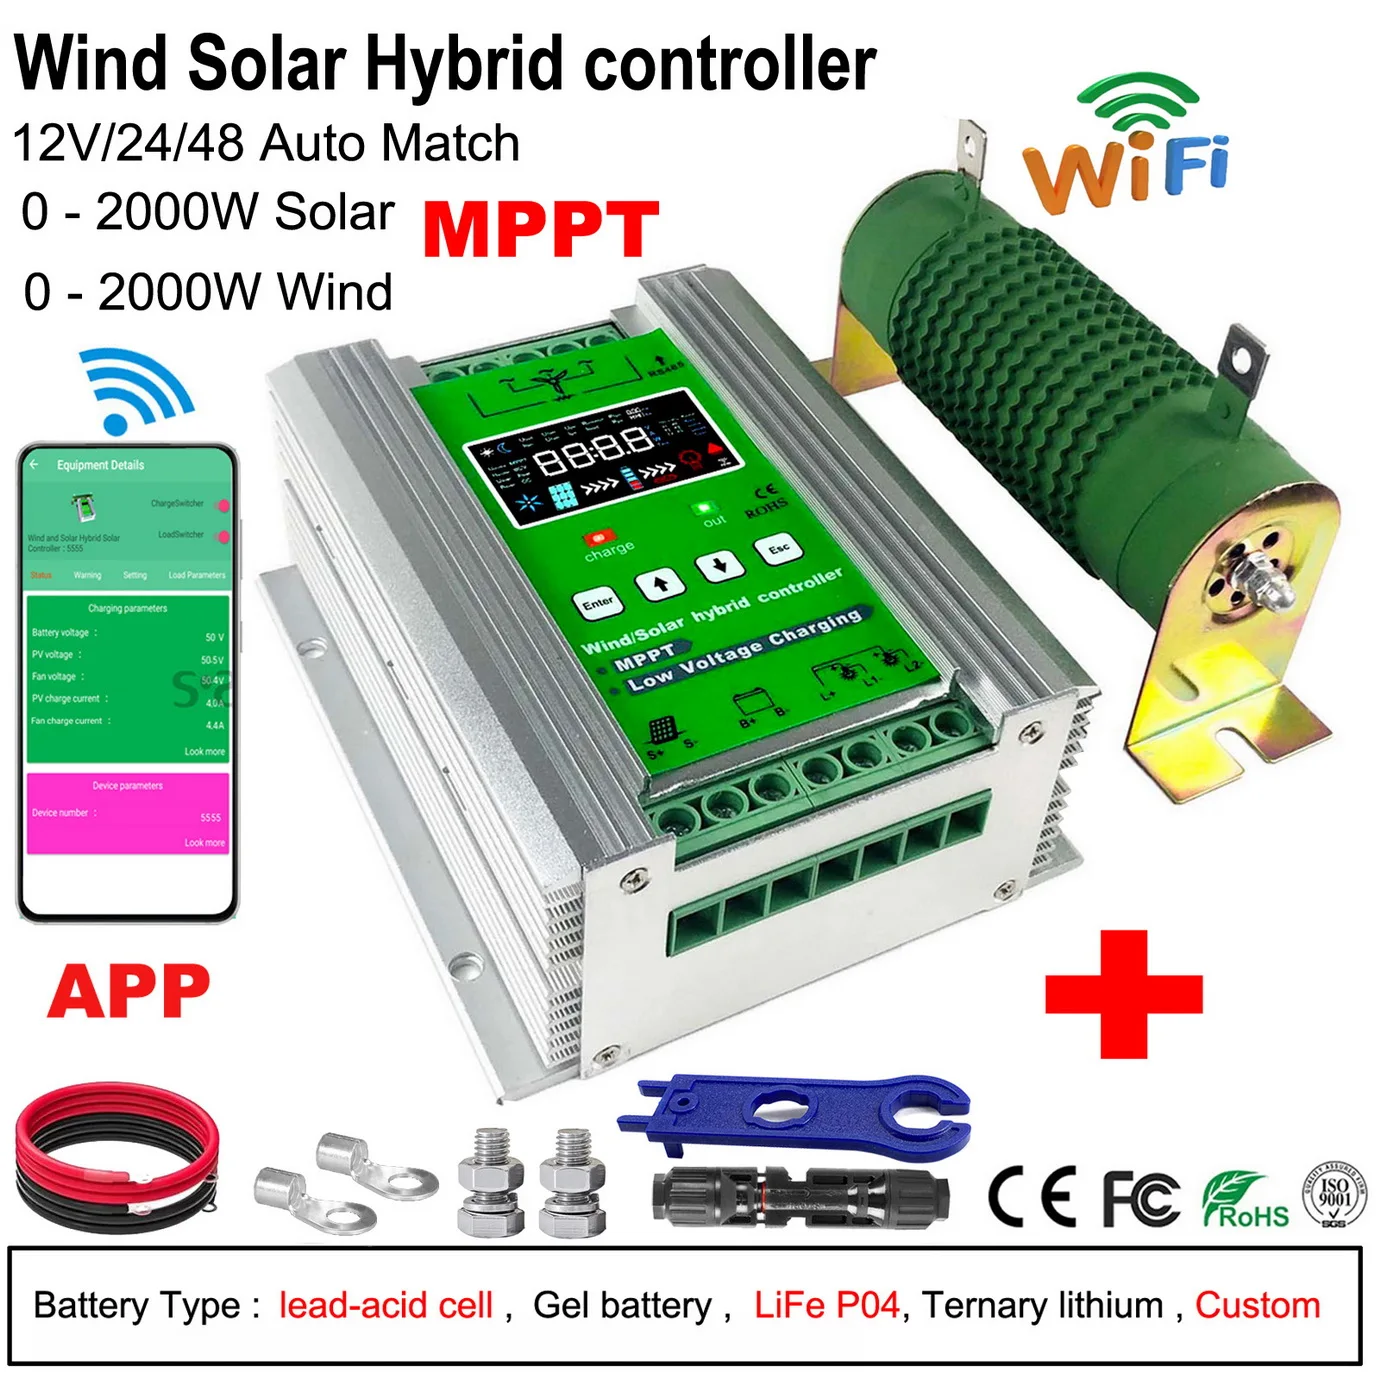 

3000w 4000W(Wind 2000W+ Solar 2000W) Wifi 12V 24V 48V AUTO MPPT solar wind Hybrid charge Controller, With Dump Load,LED Display